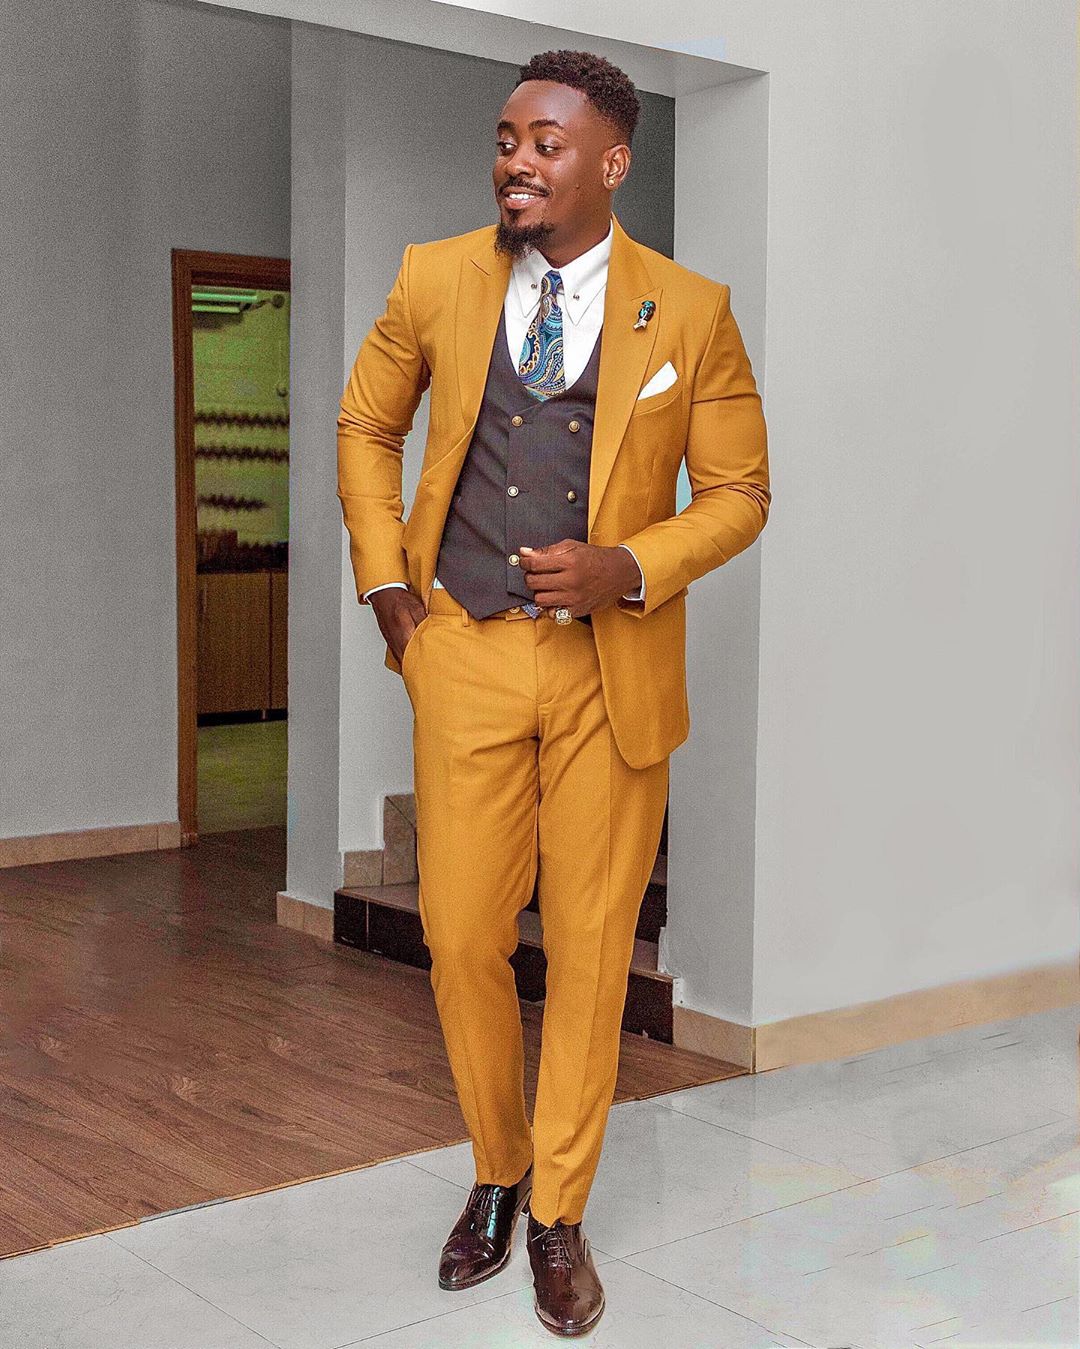 male-celebrities-africa-dapper-inspiration-style-rave